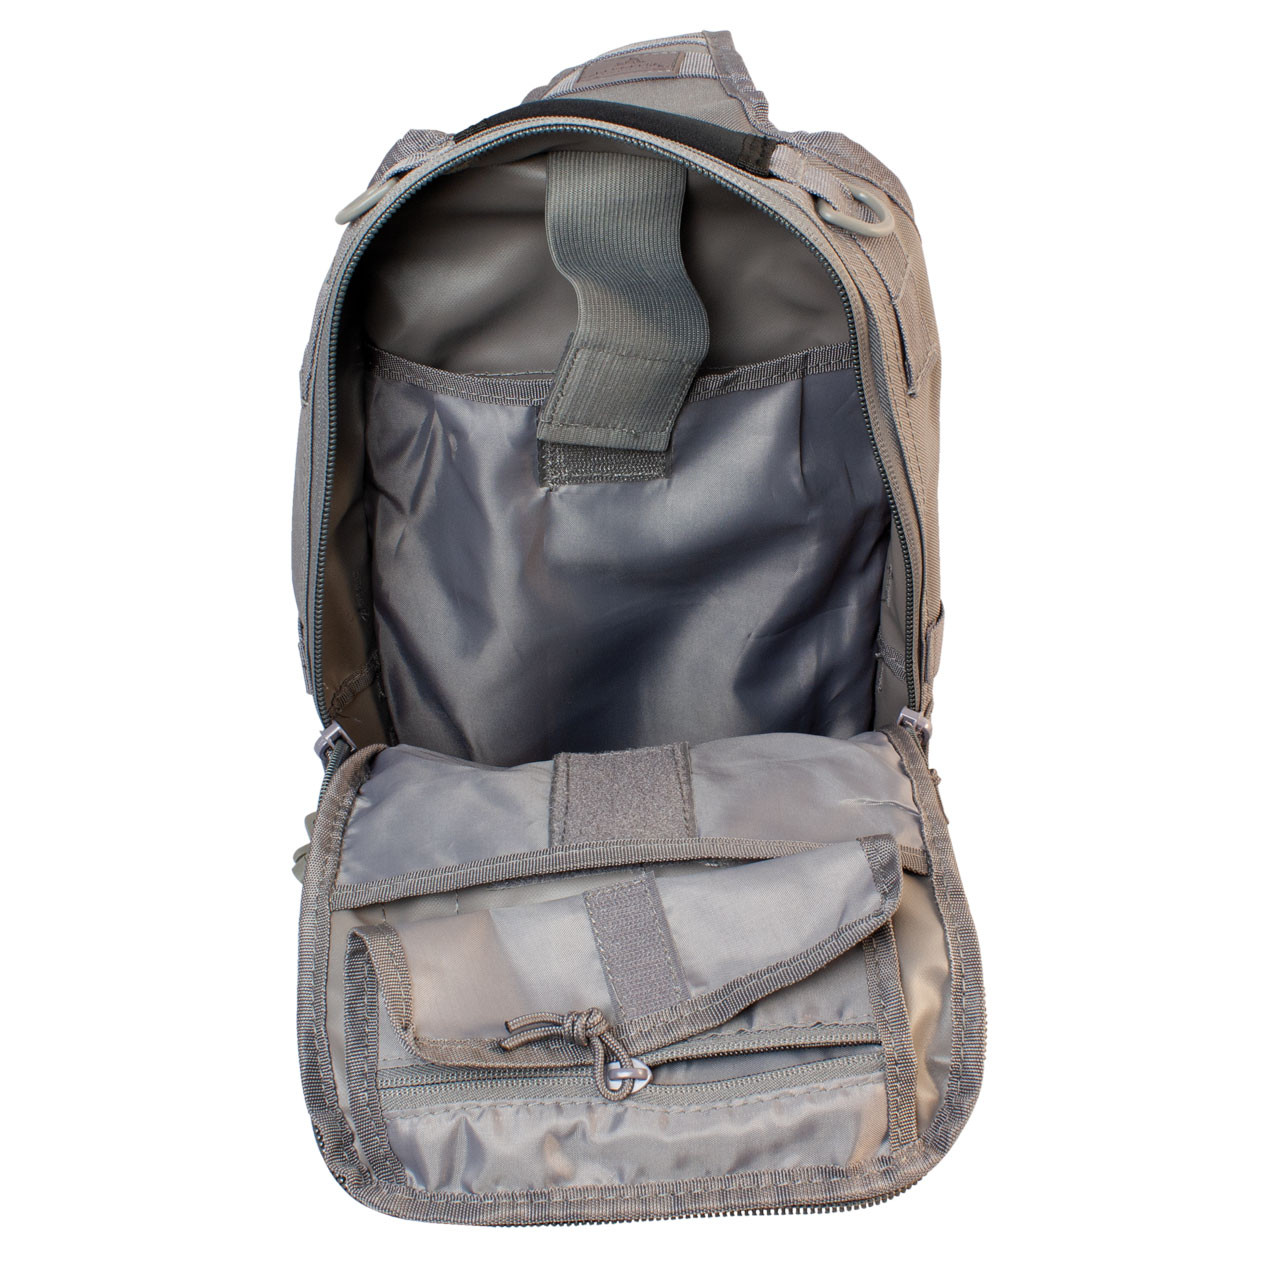 Large Rover Sling Pack - Inside Main Compartment- Tornado